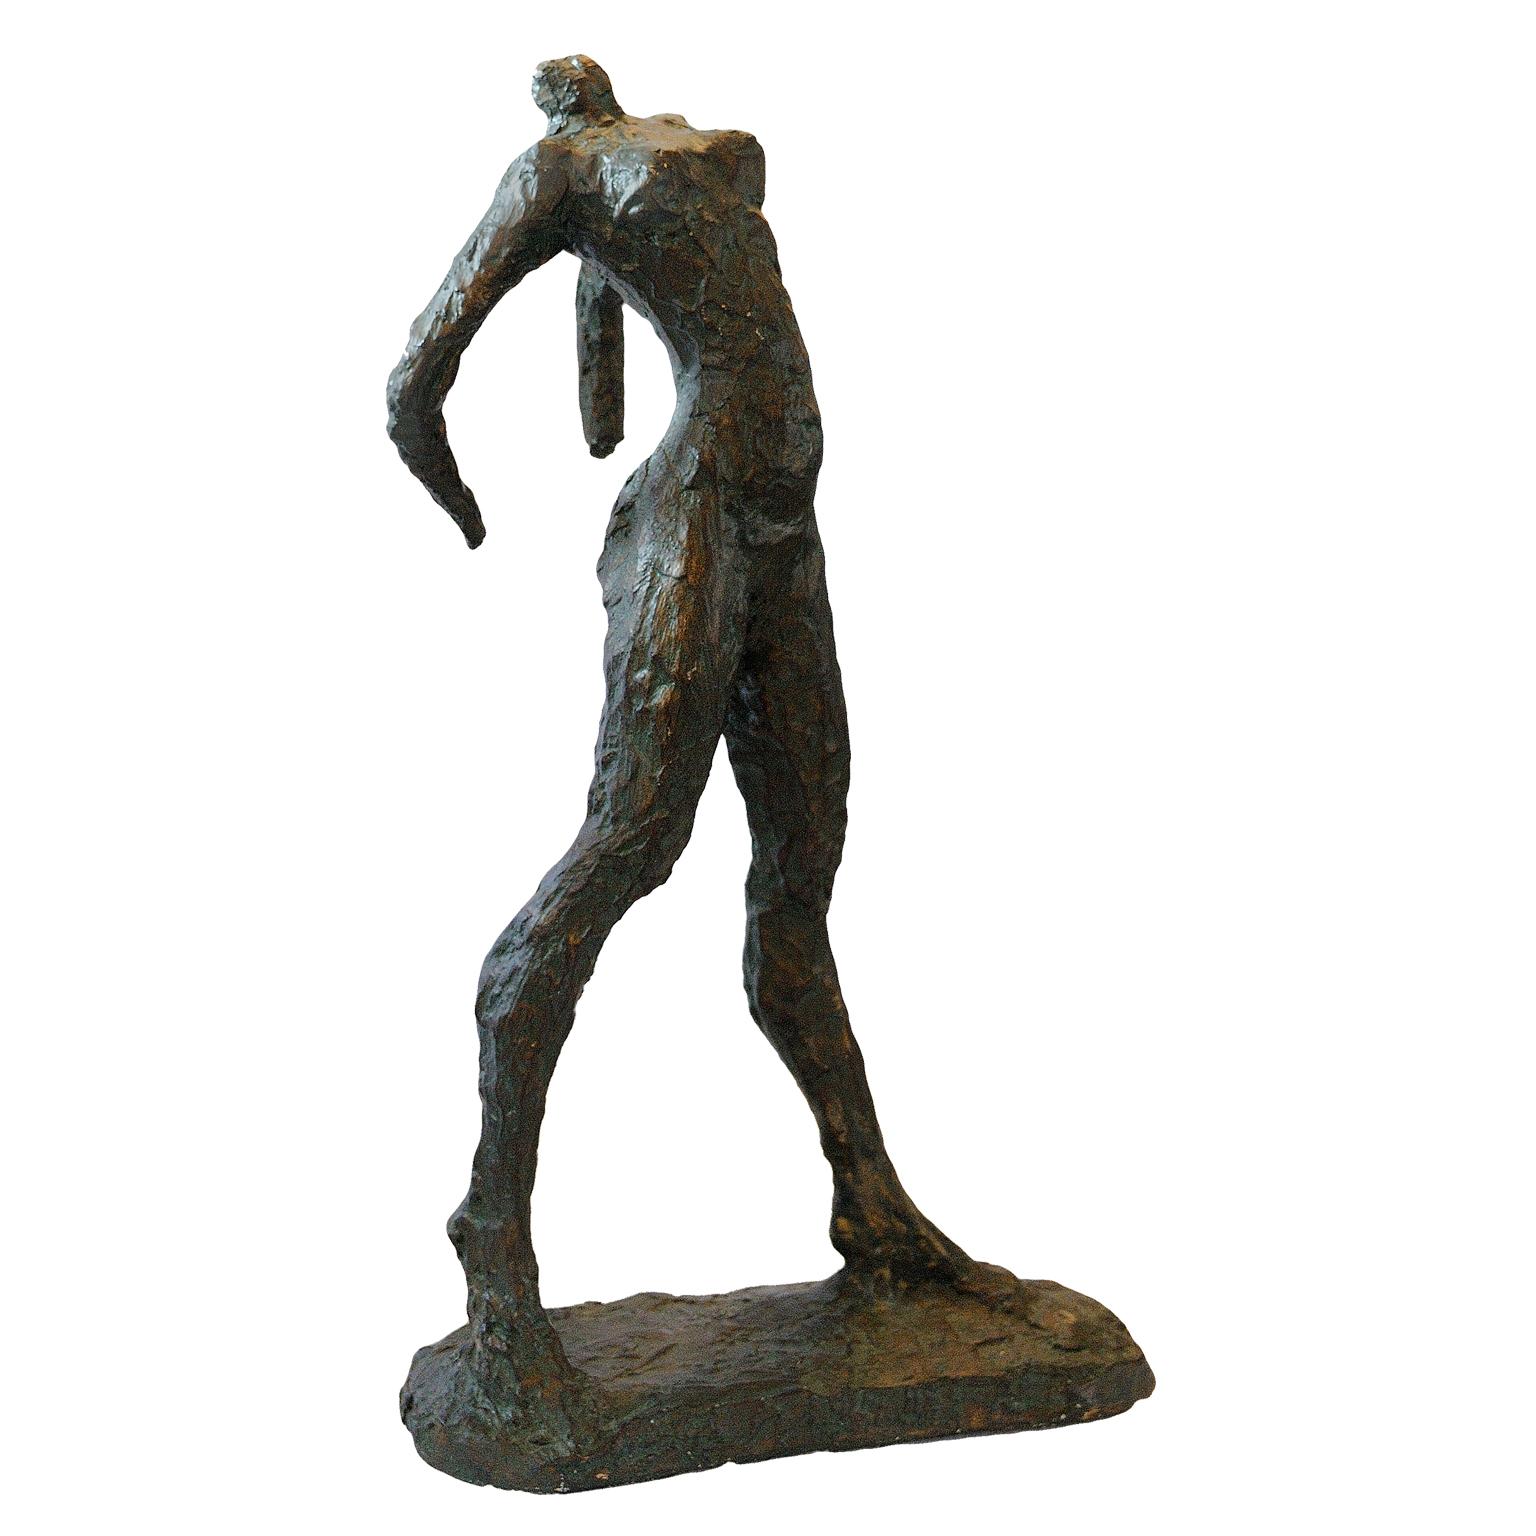 This is a superb French Louvre Museum composition copy of the bronze sculpture 'The Walking Woman' originally by Alberto Giacometti, circa 1970.

During the late 1950s Giacometti made a number of fragmentary figures, their arms partly or entirely